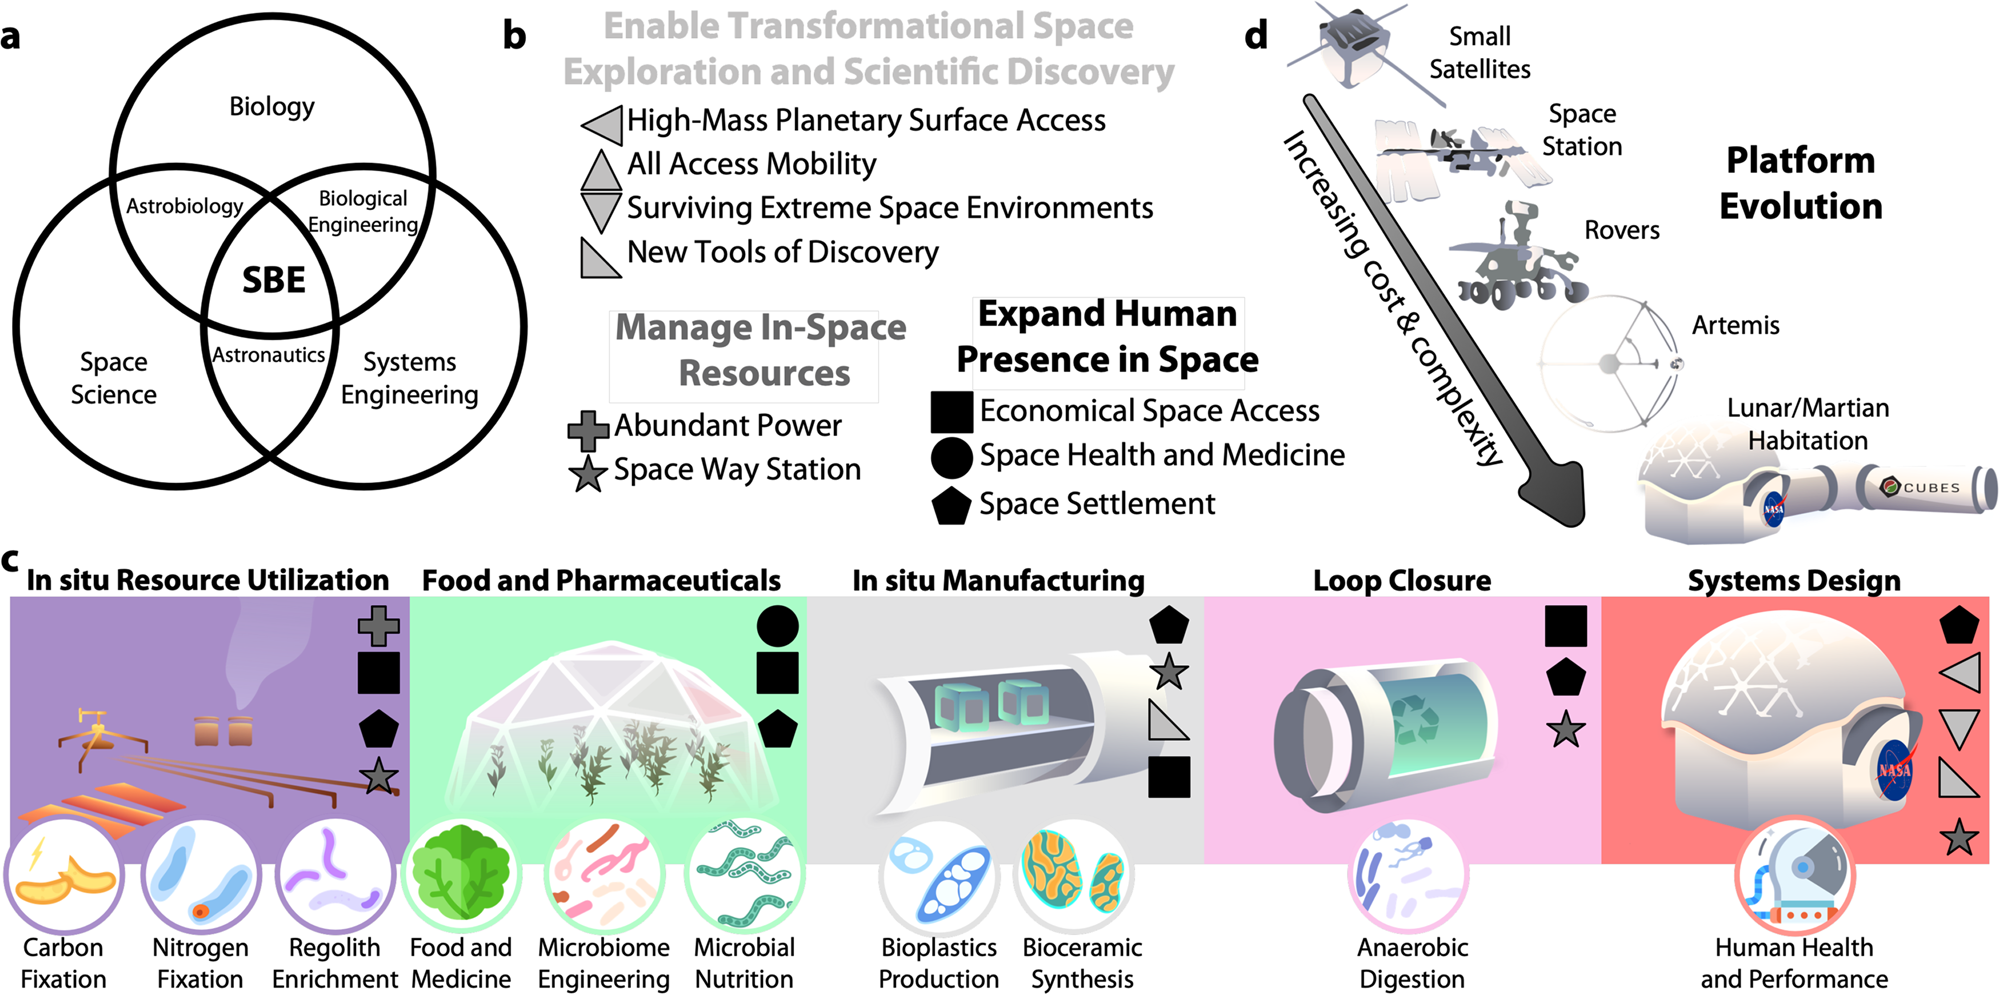 Toward sustainable space exploration: a roadmap for harnessing the power of  microorganisms